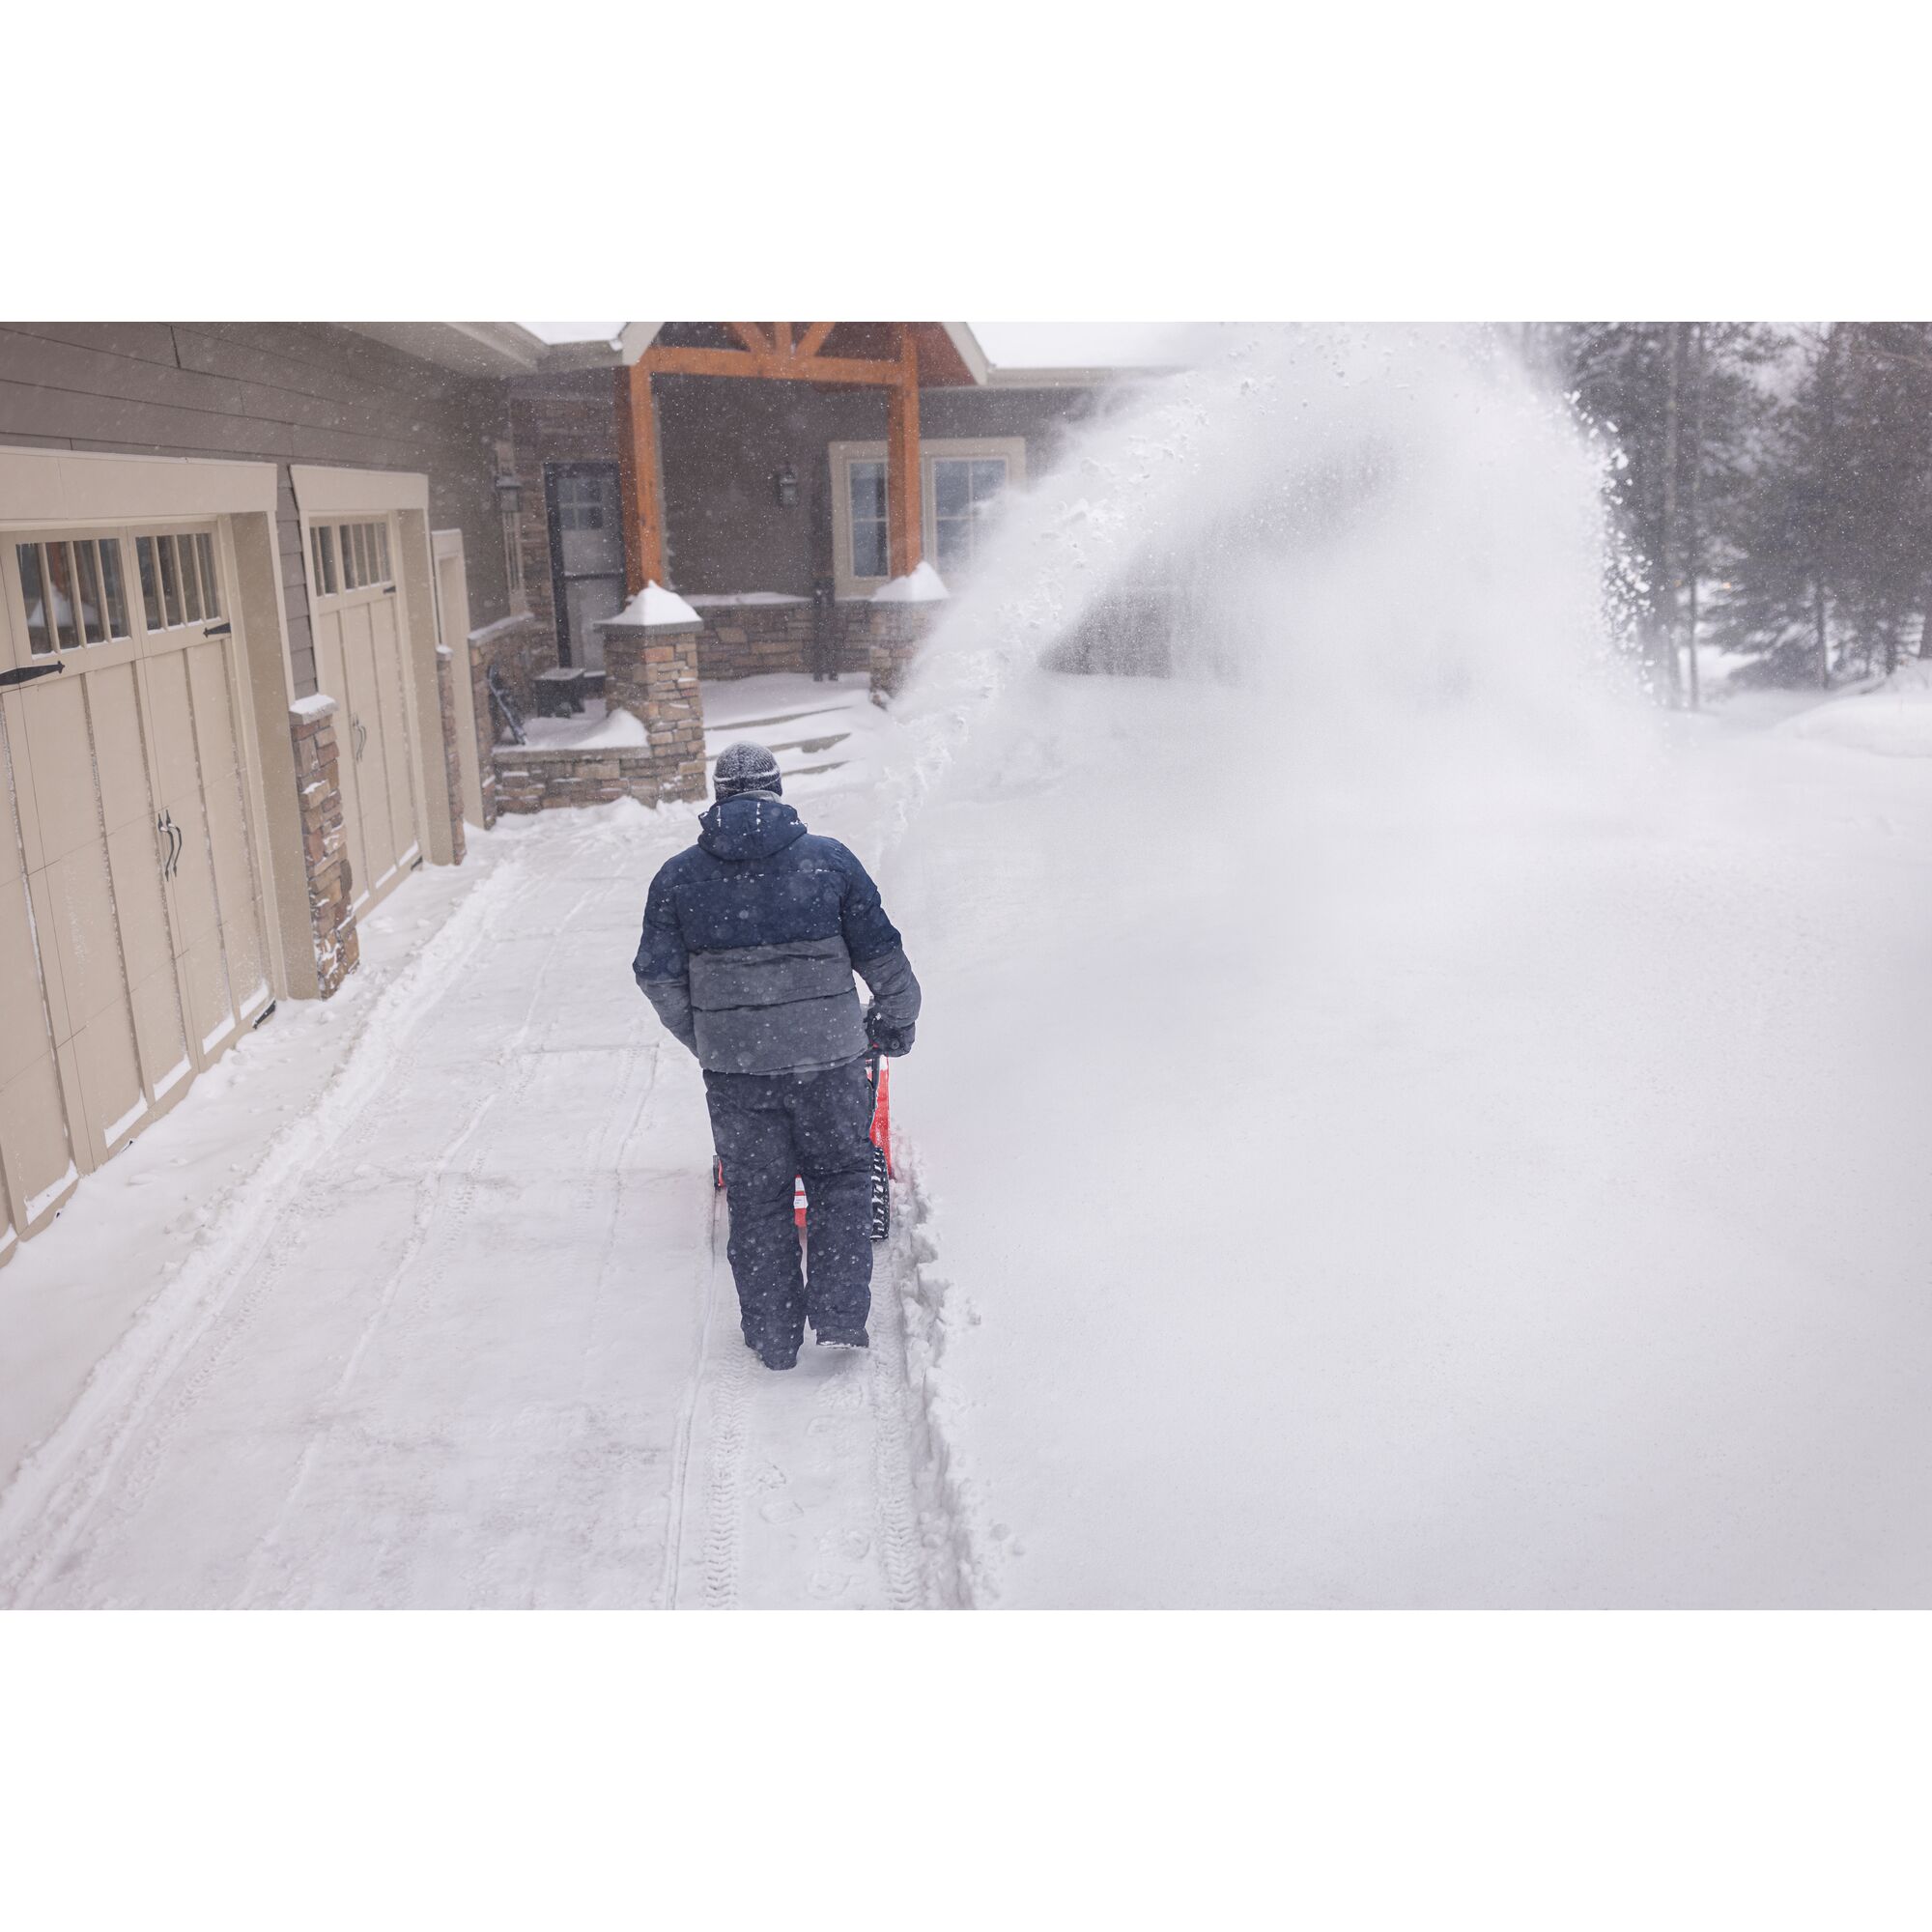 CRAFTSMAN Select 24 Snowblower clearing snow off driveway near garage